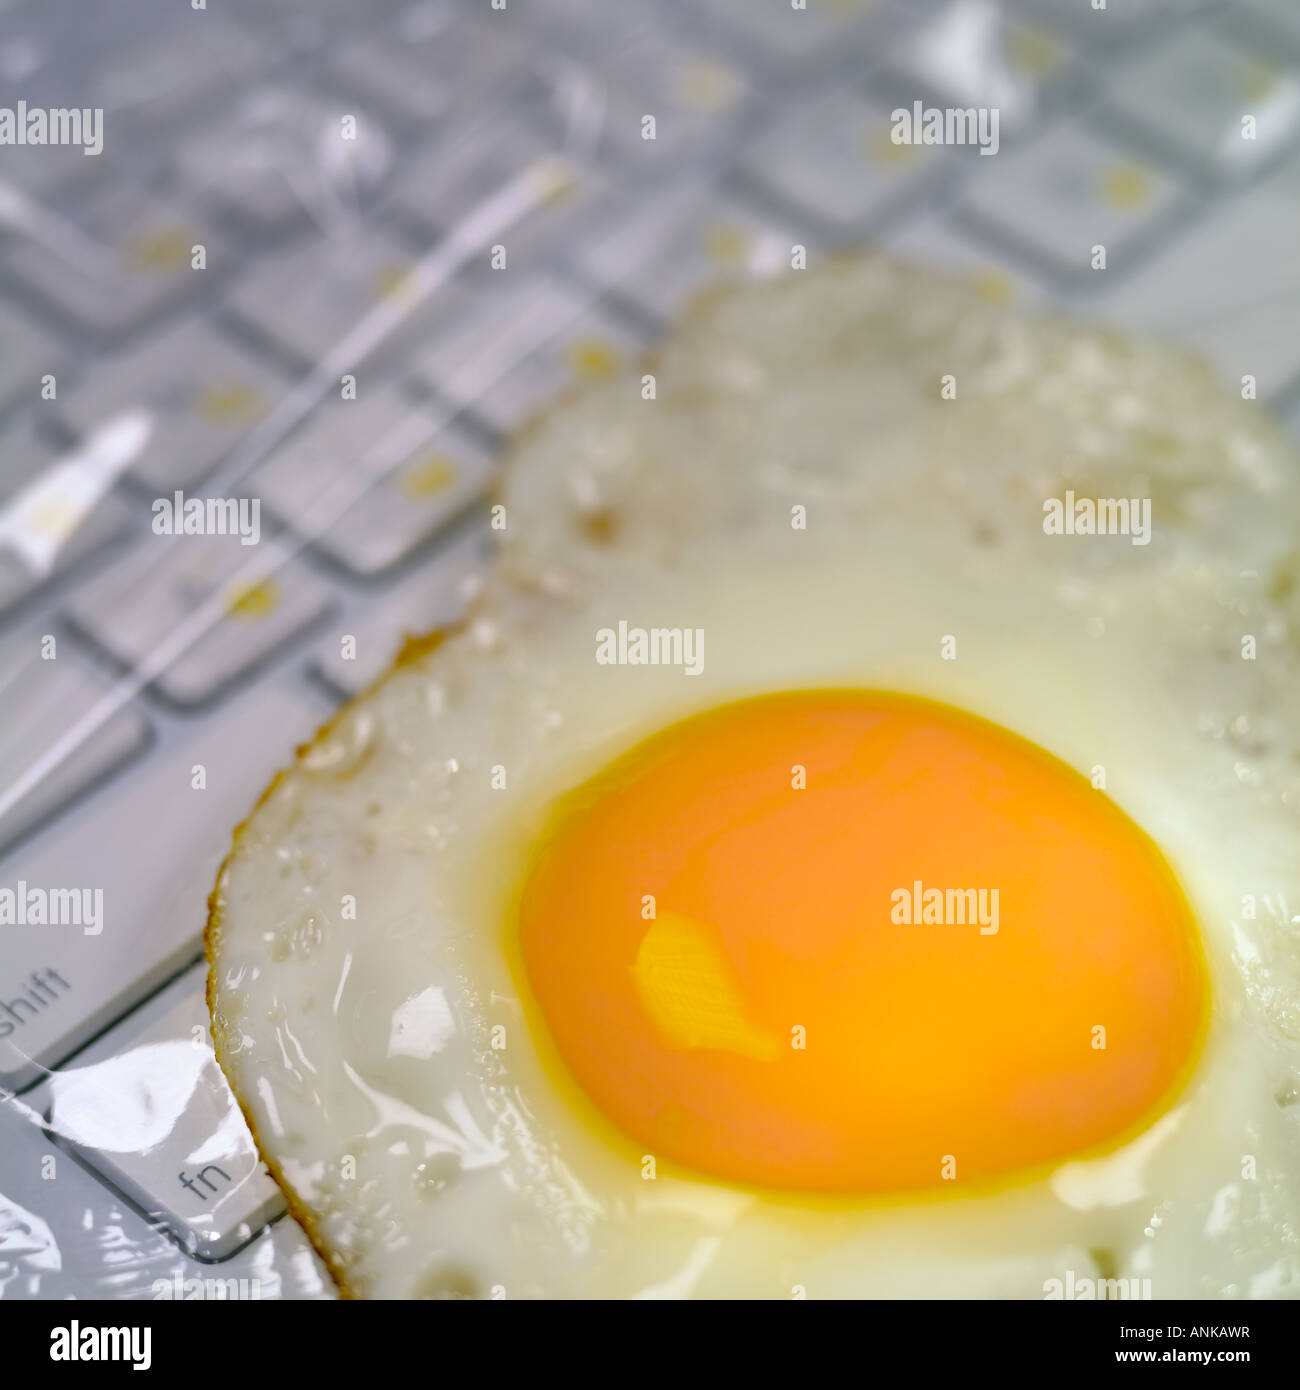 Egg over the laptop keyboard Stock Photo